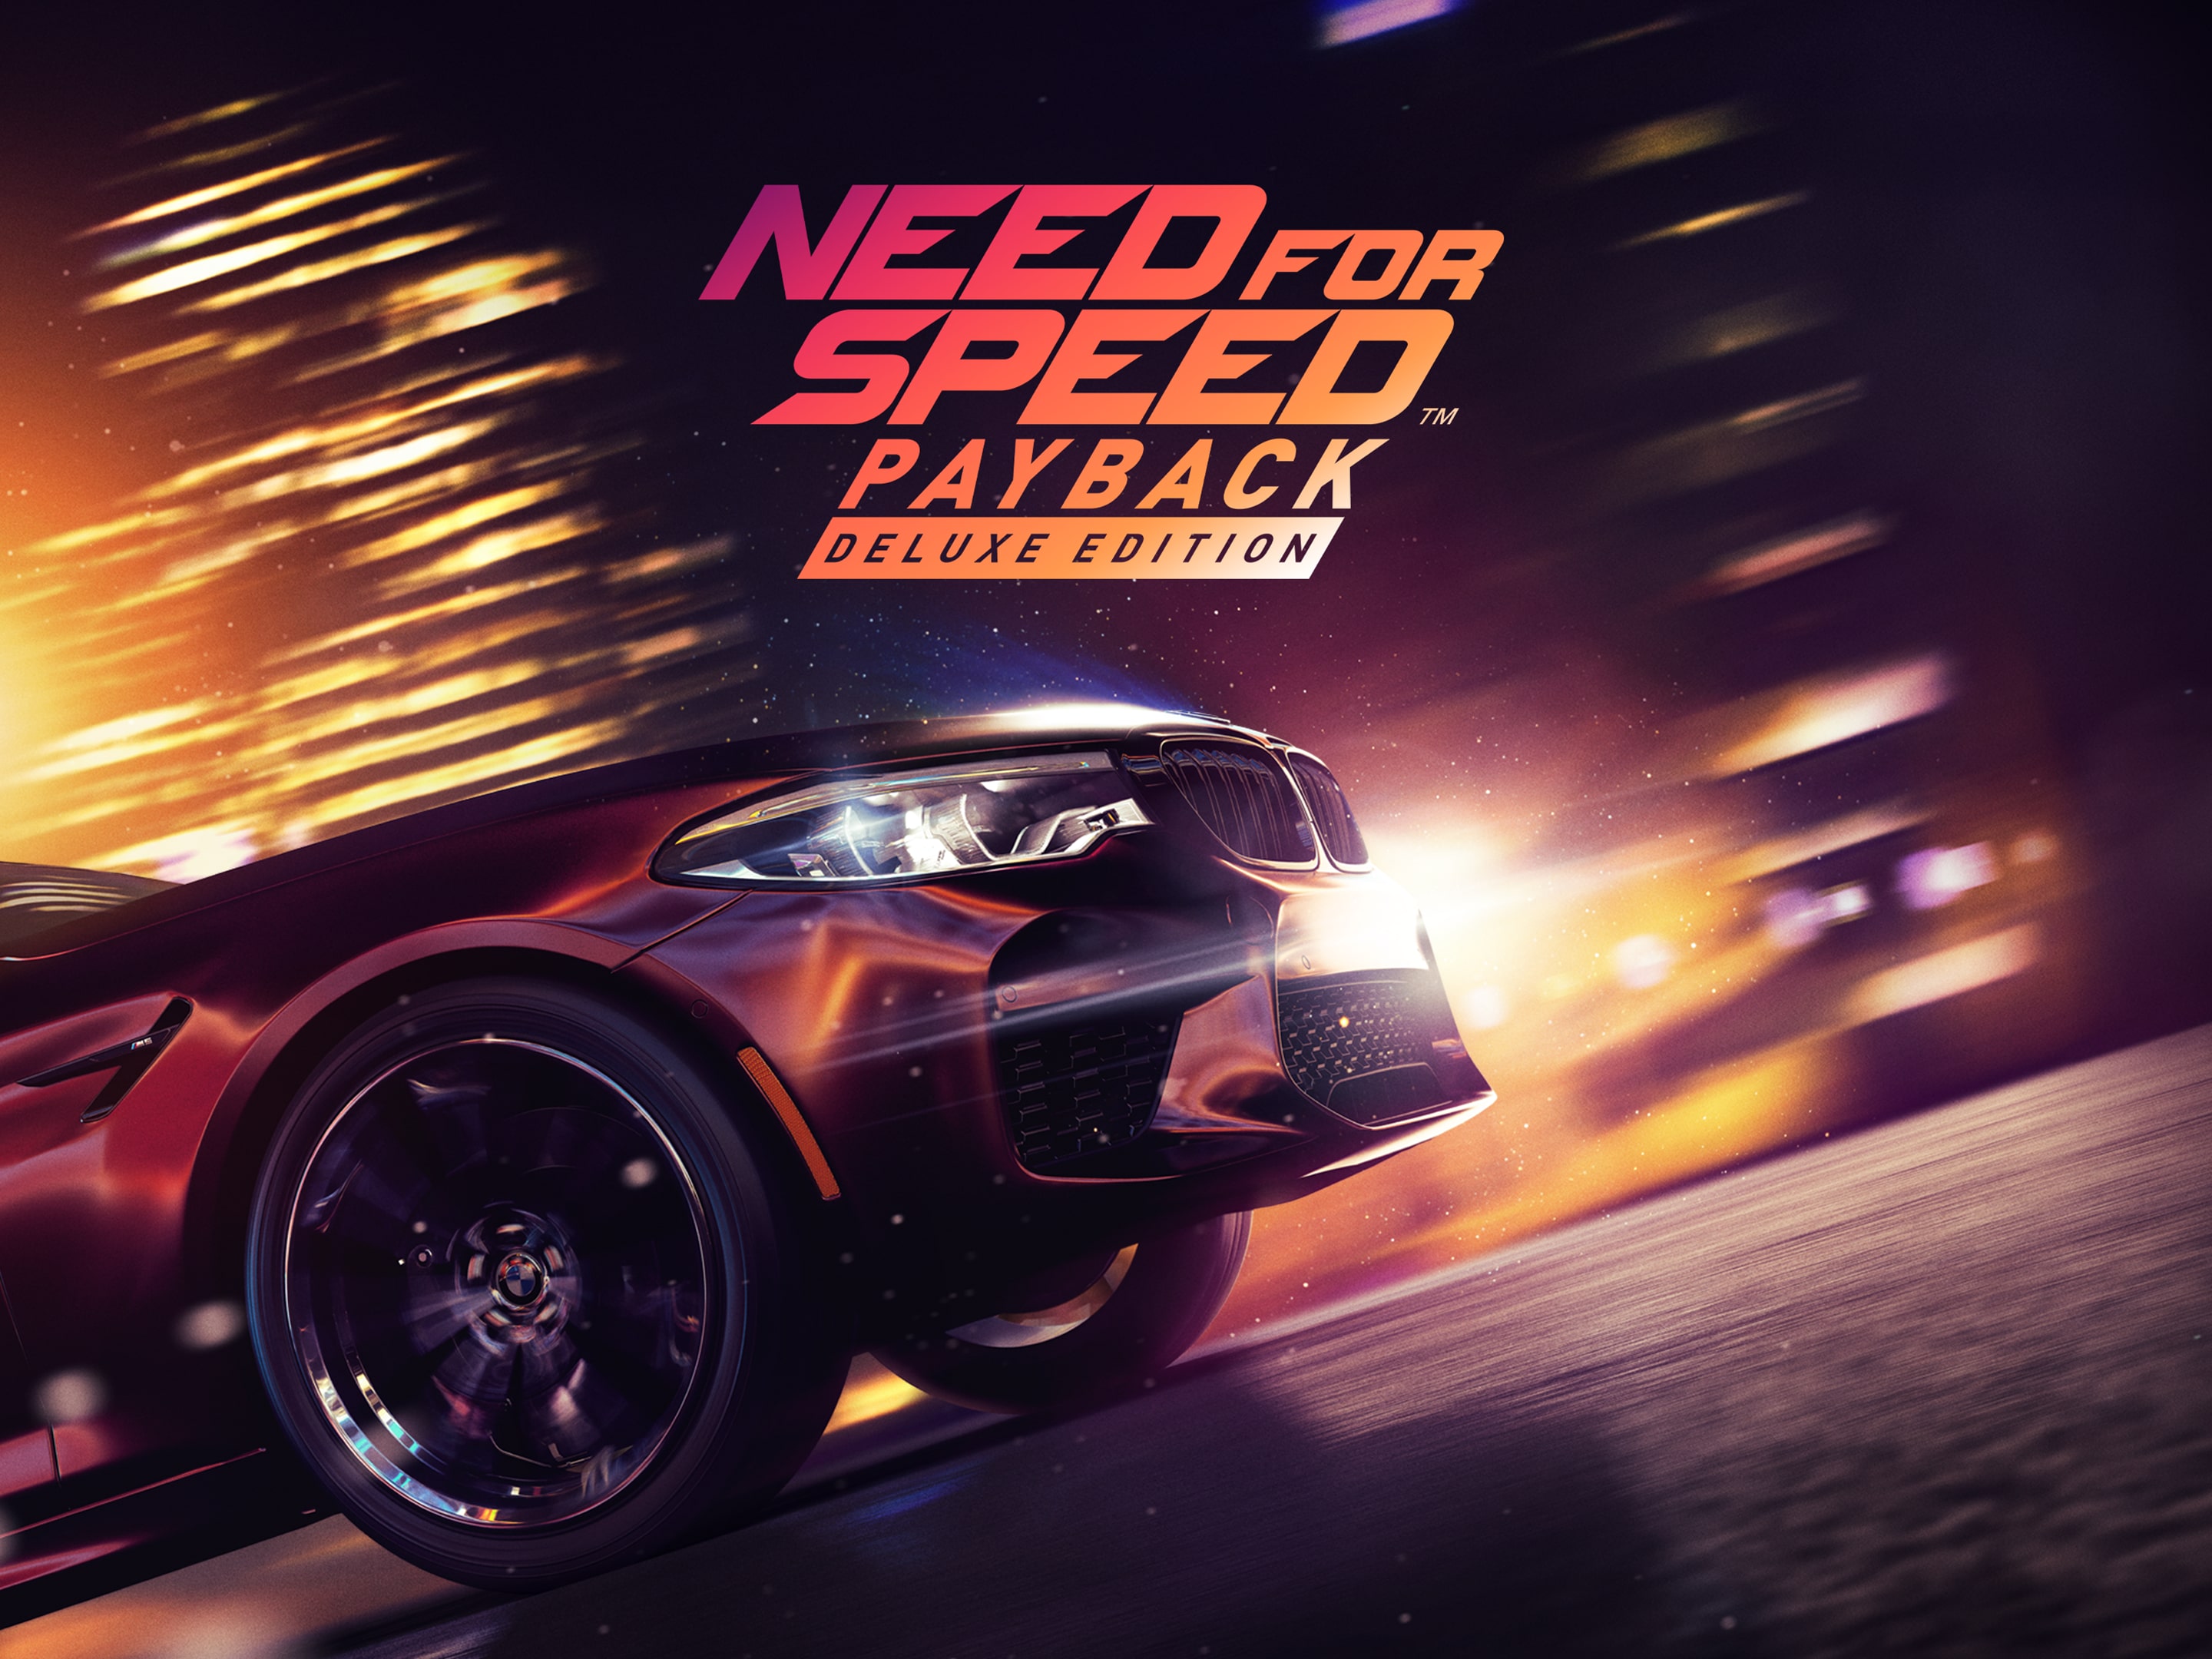 Nfs payback ps4. Need for Speed Payback (ps4). Need for Speed Payback пс4. Нфс пейбек ПС 3.